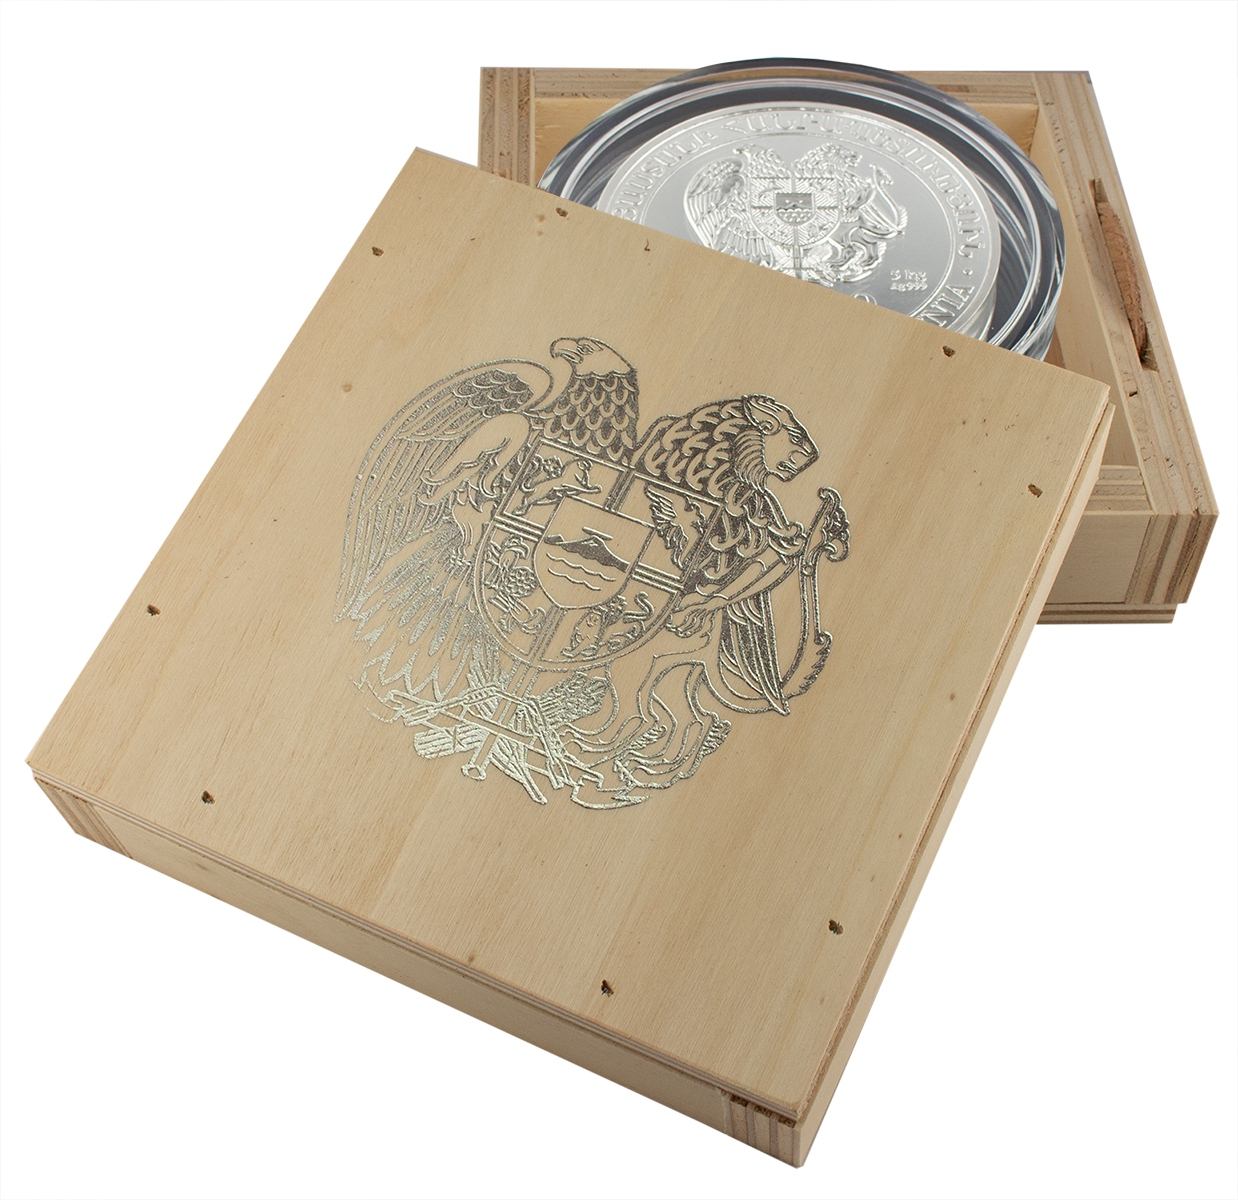 Wooden Box with insert for 5 kg silver coin